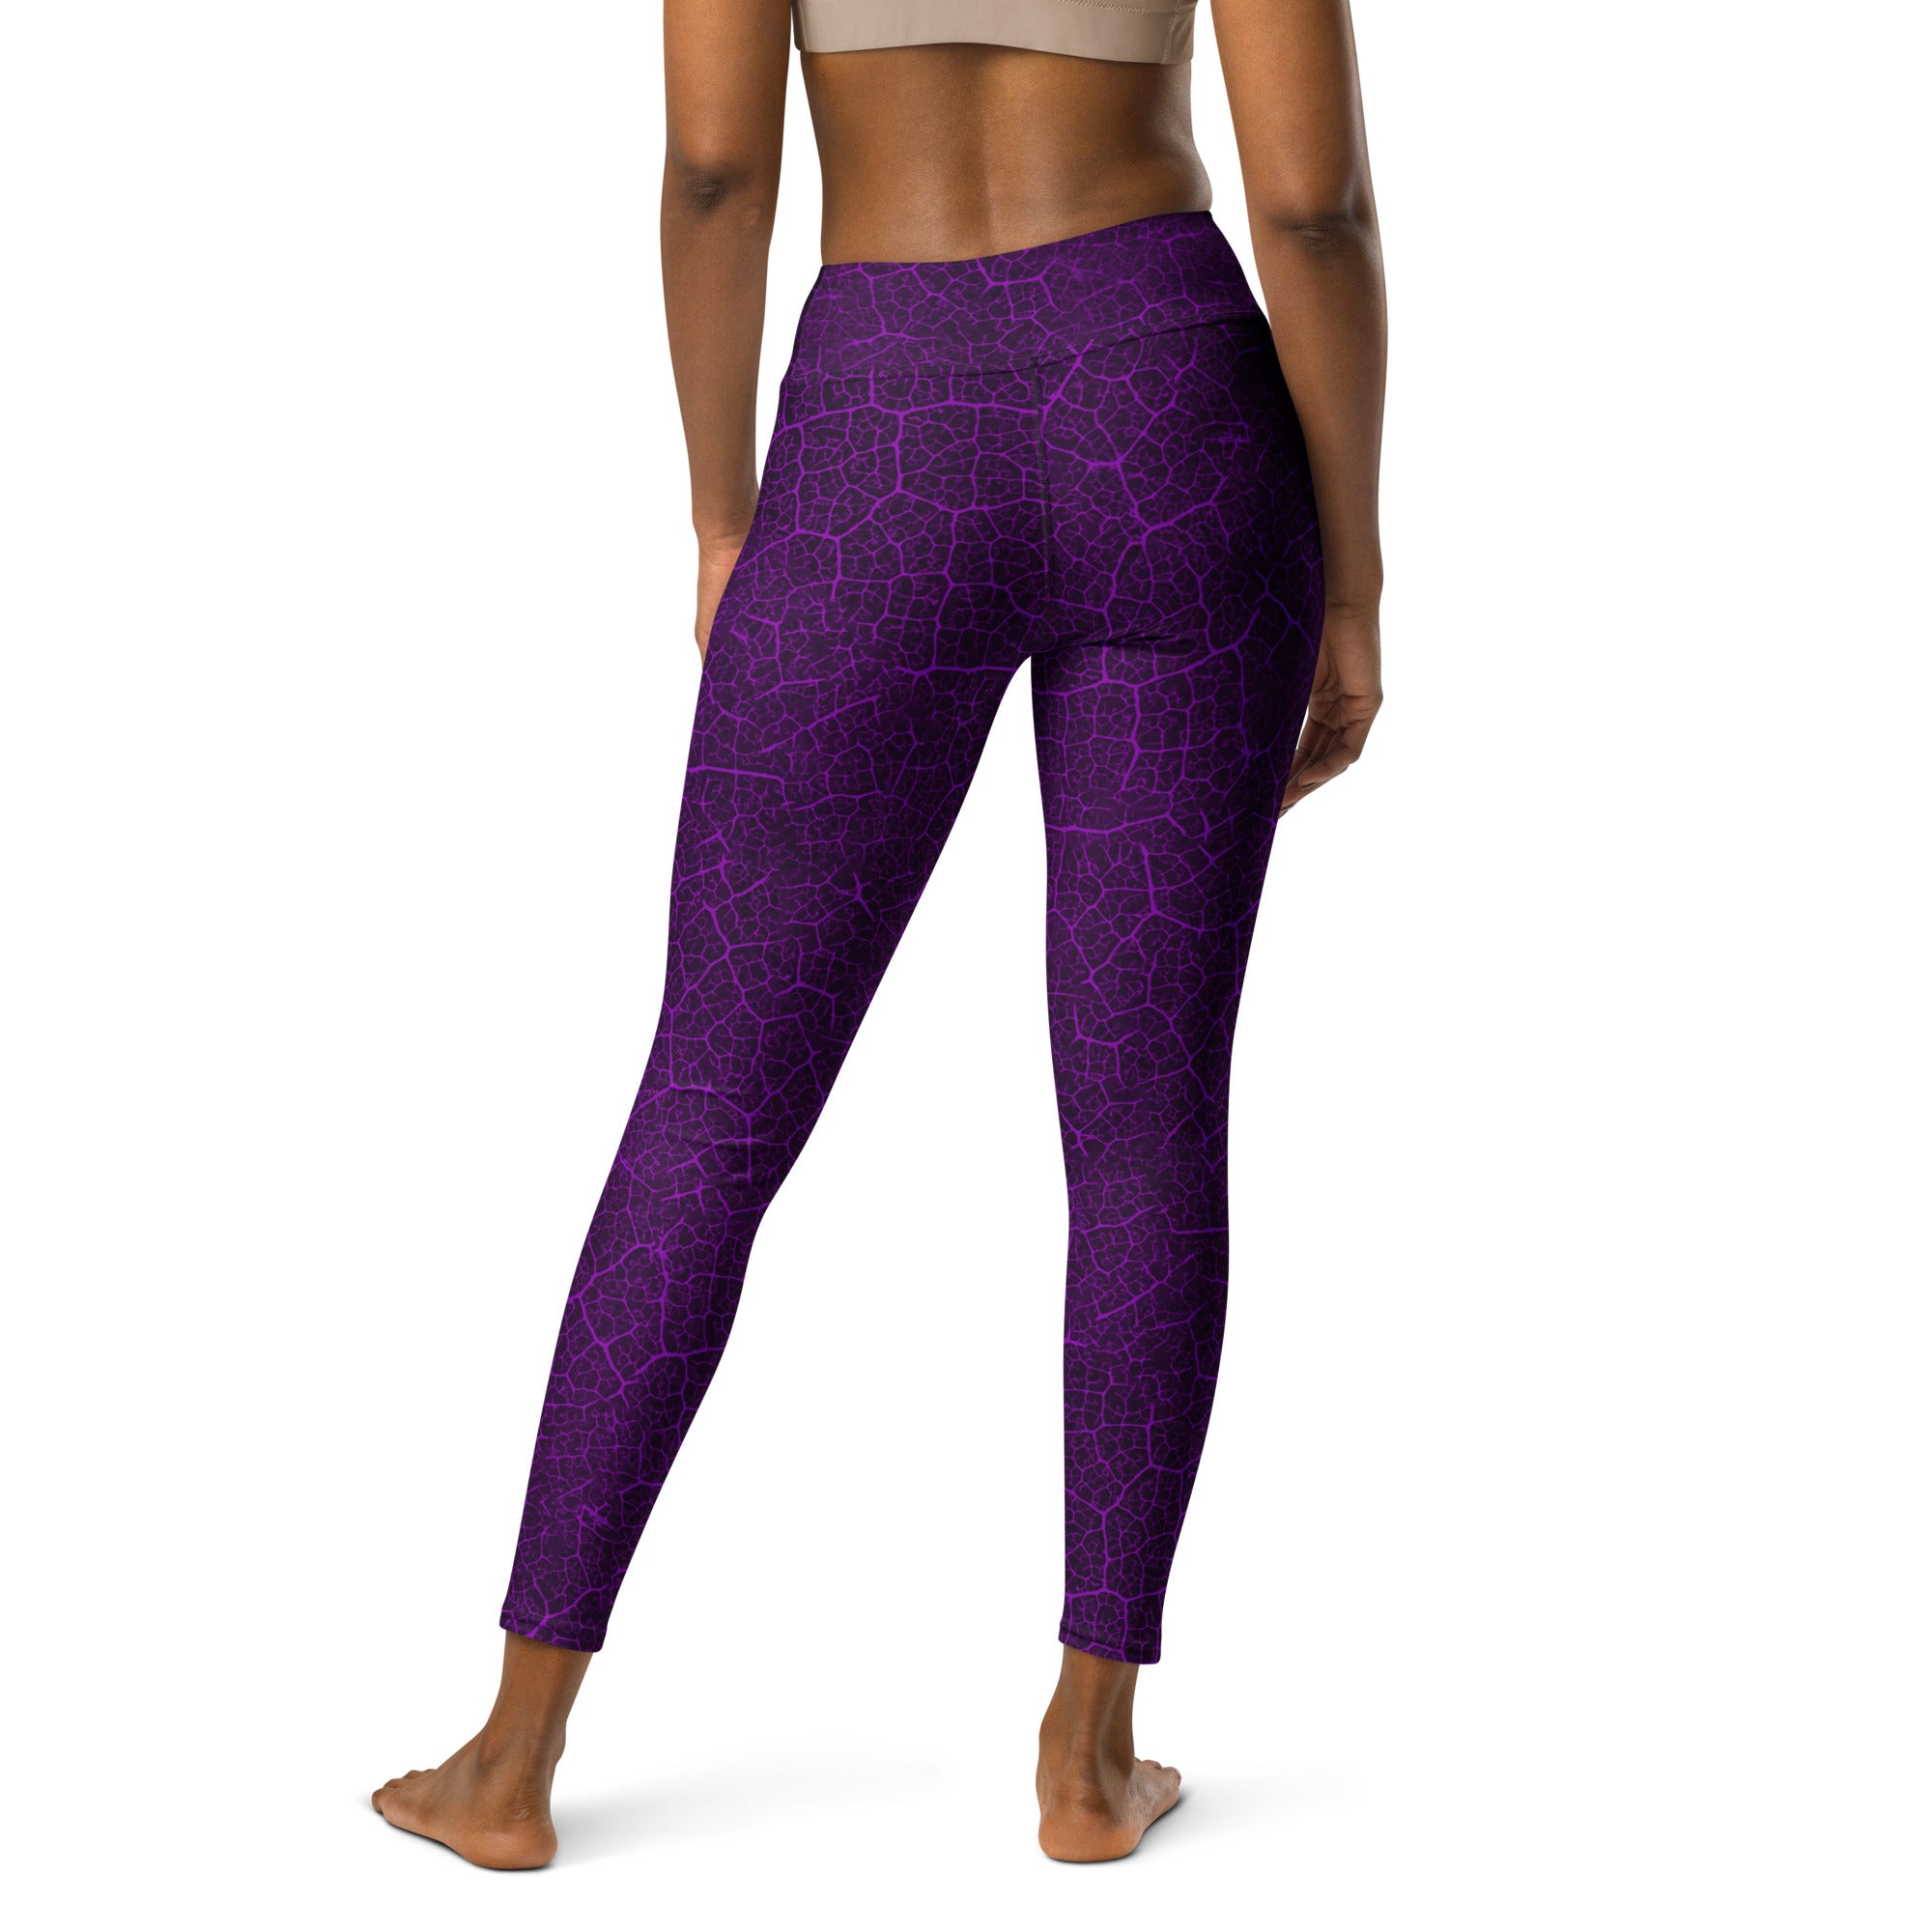 Tropical Oasis Yoga Leggings displayed, emphasizing the all-over tropical design and body-hugging fit for yoga enthusiasts.